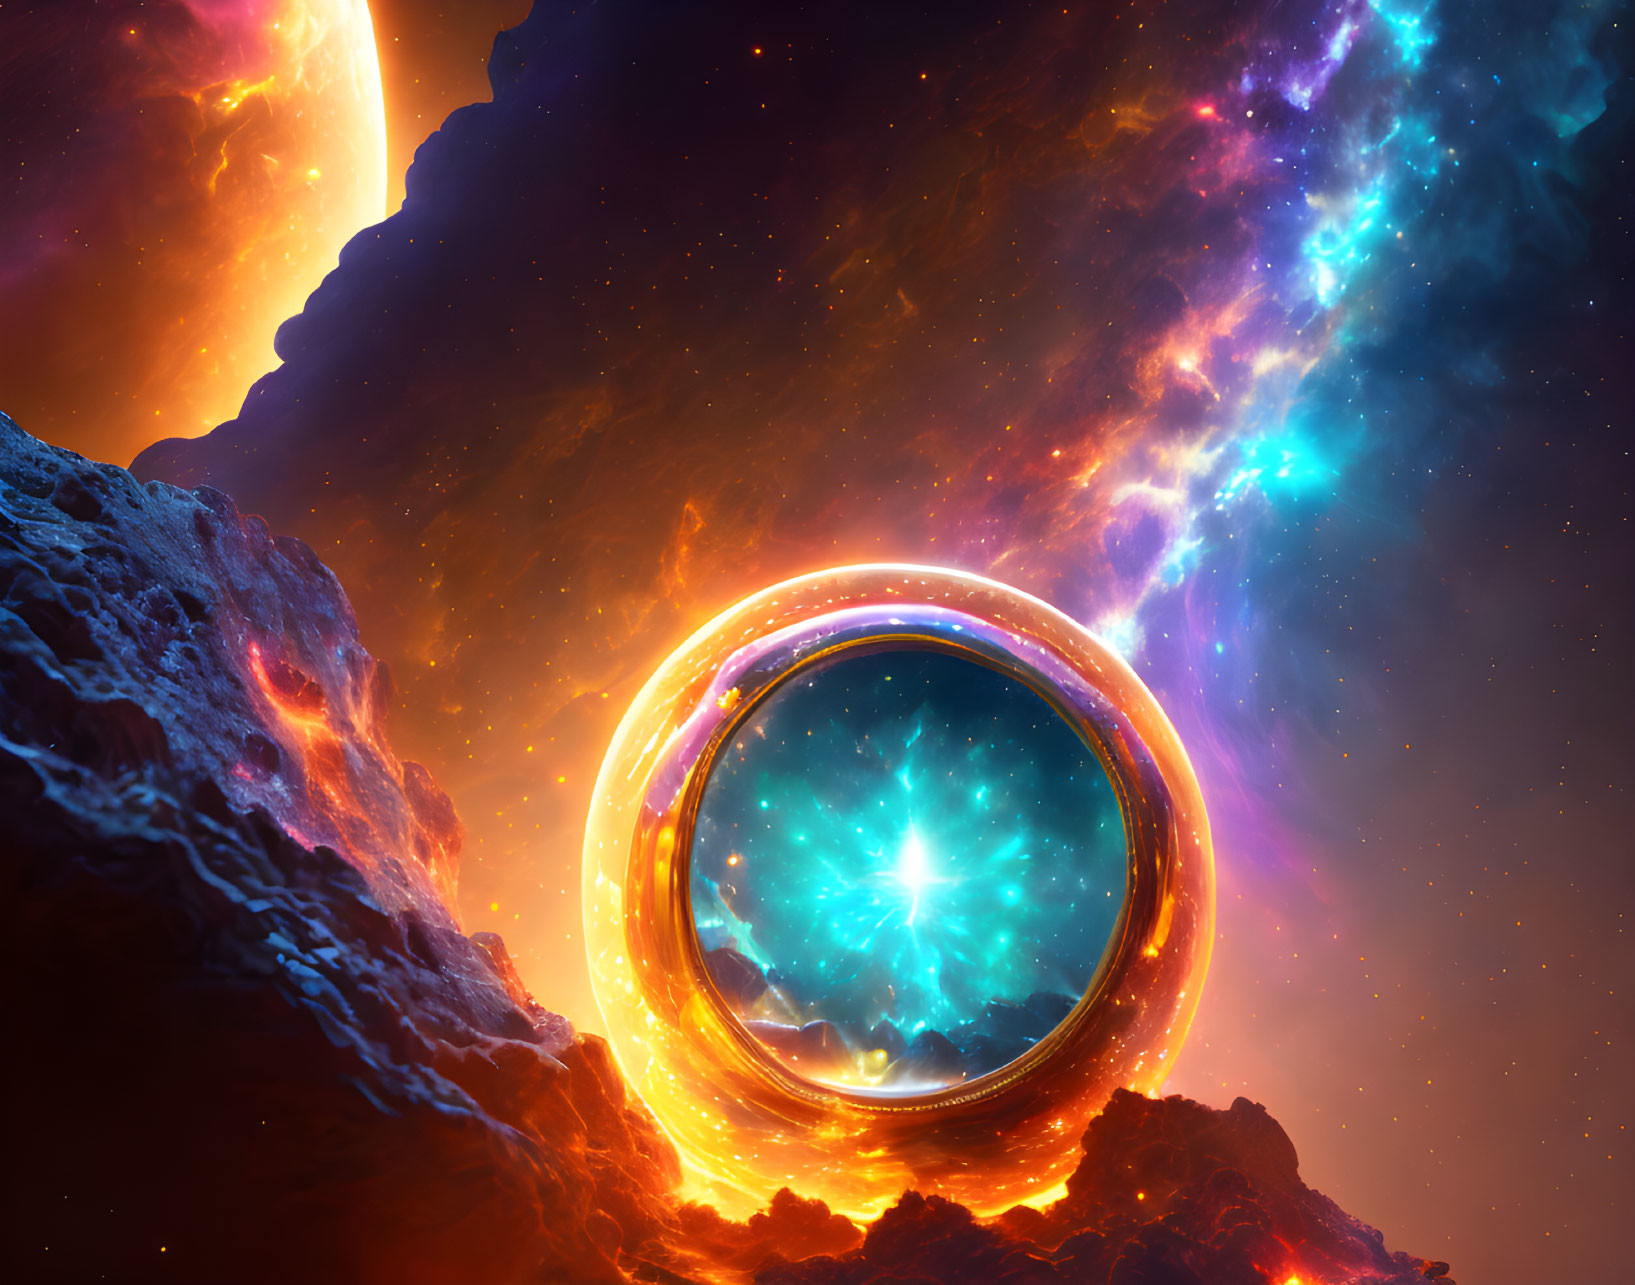 Colorful Cosmic Scene with Glowing Circular Portal and Starry Nebula